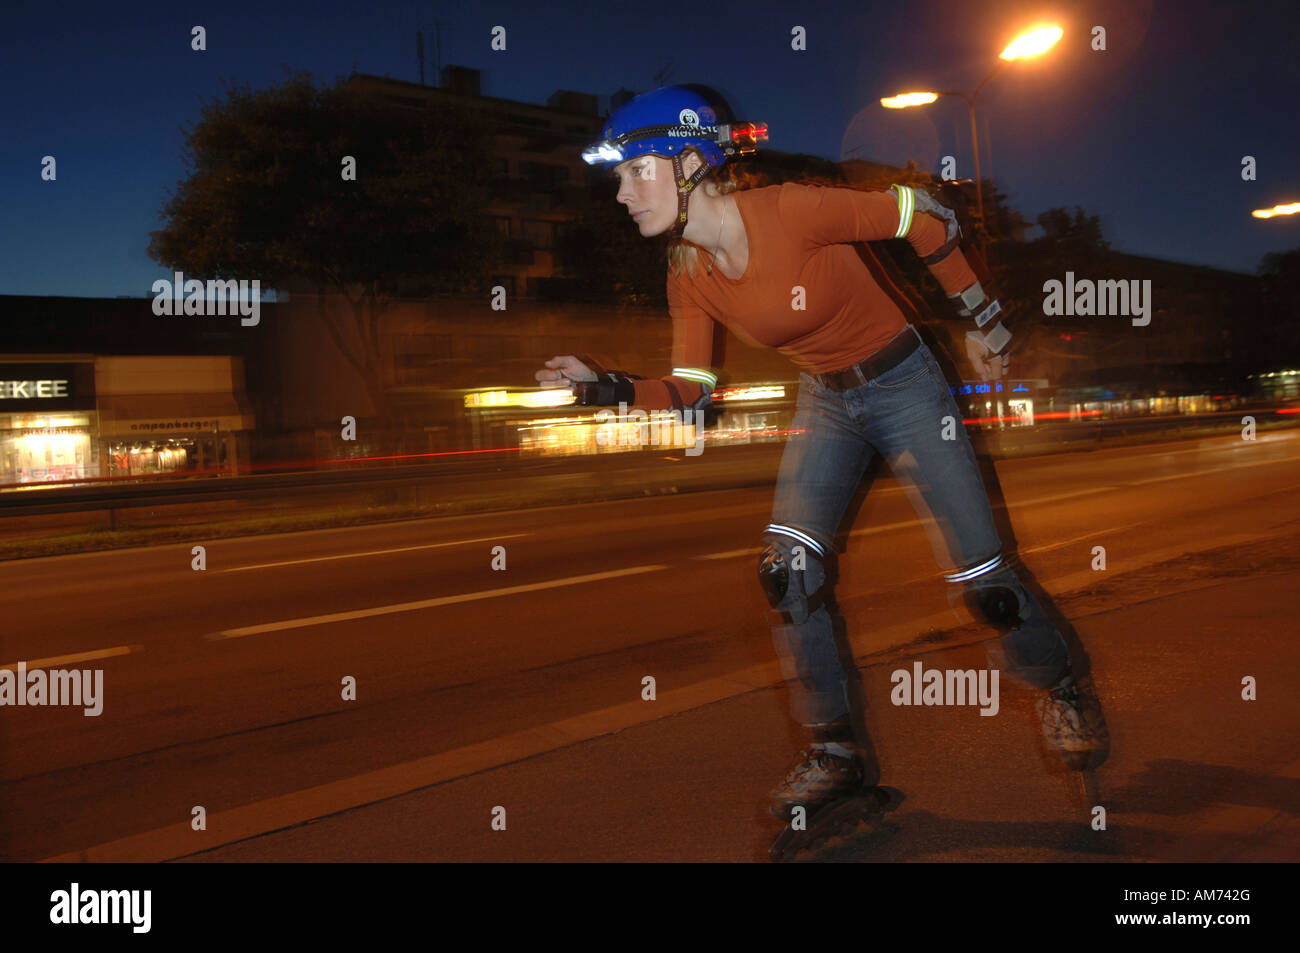 Rollerblader with lighting at dusk Stock Photo